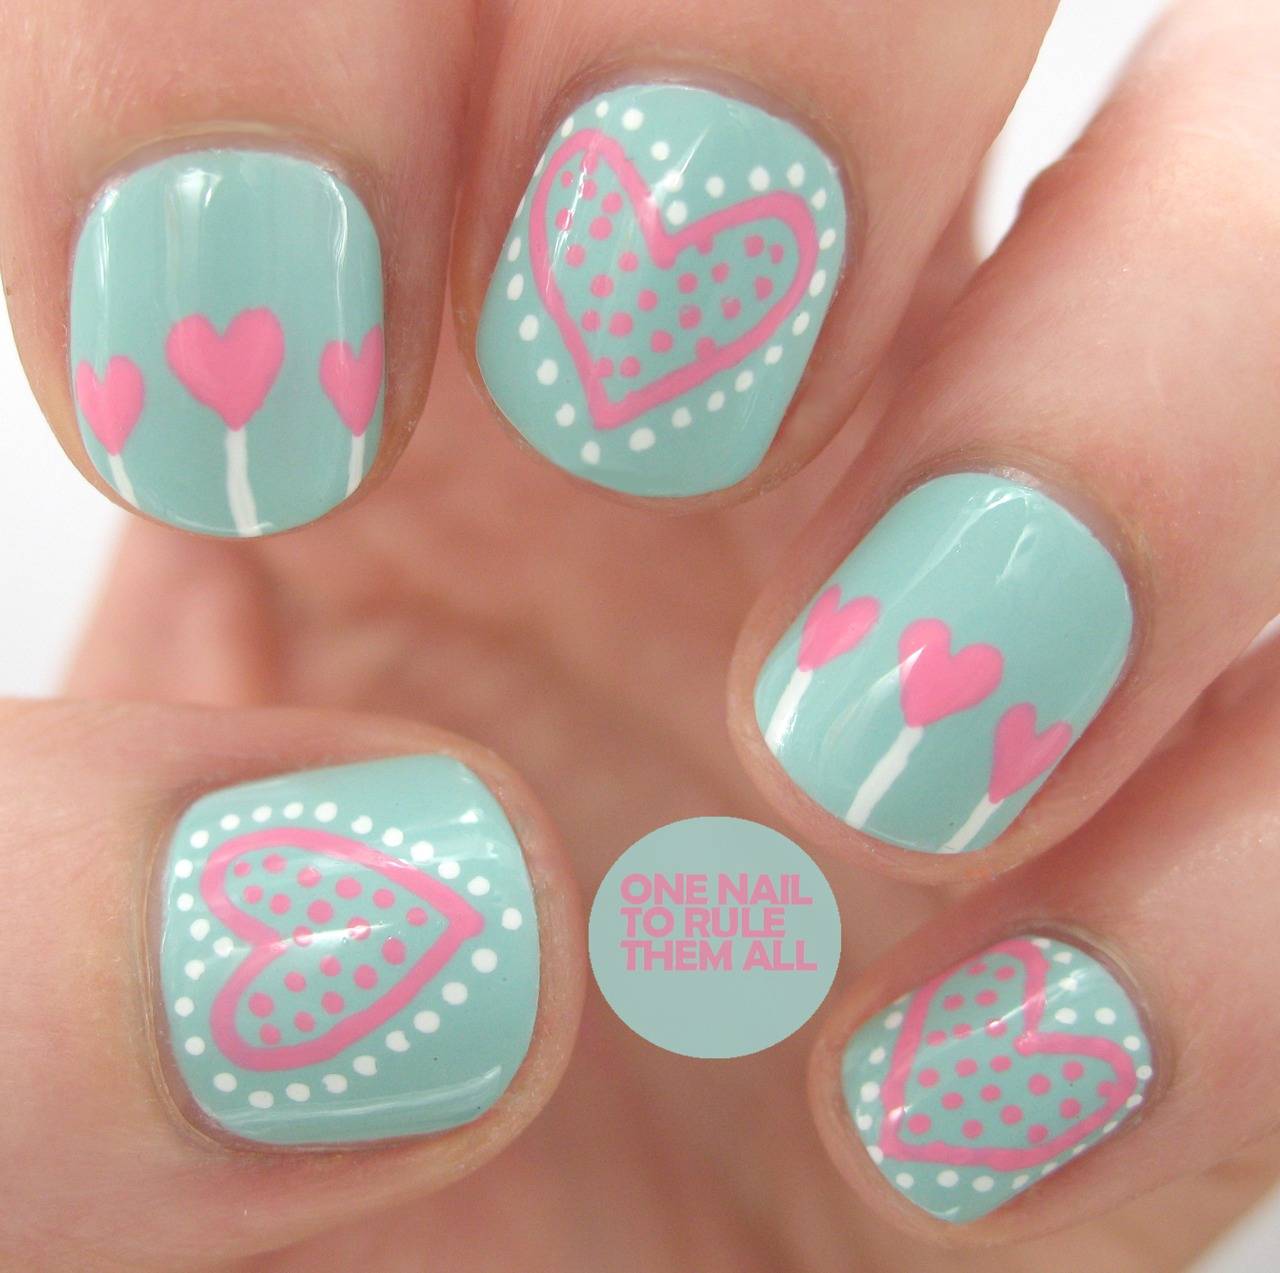 Mint Nails With Pink Hearts And White Dots Design Nail Art Idea